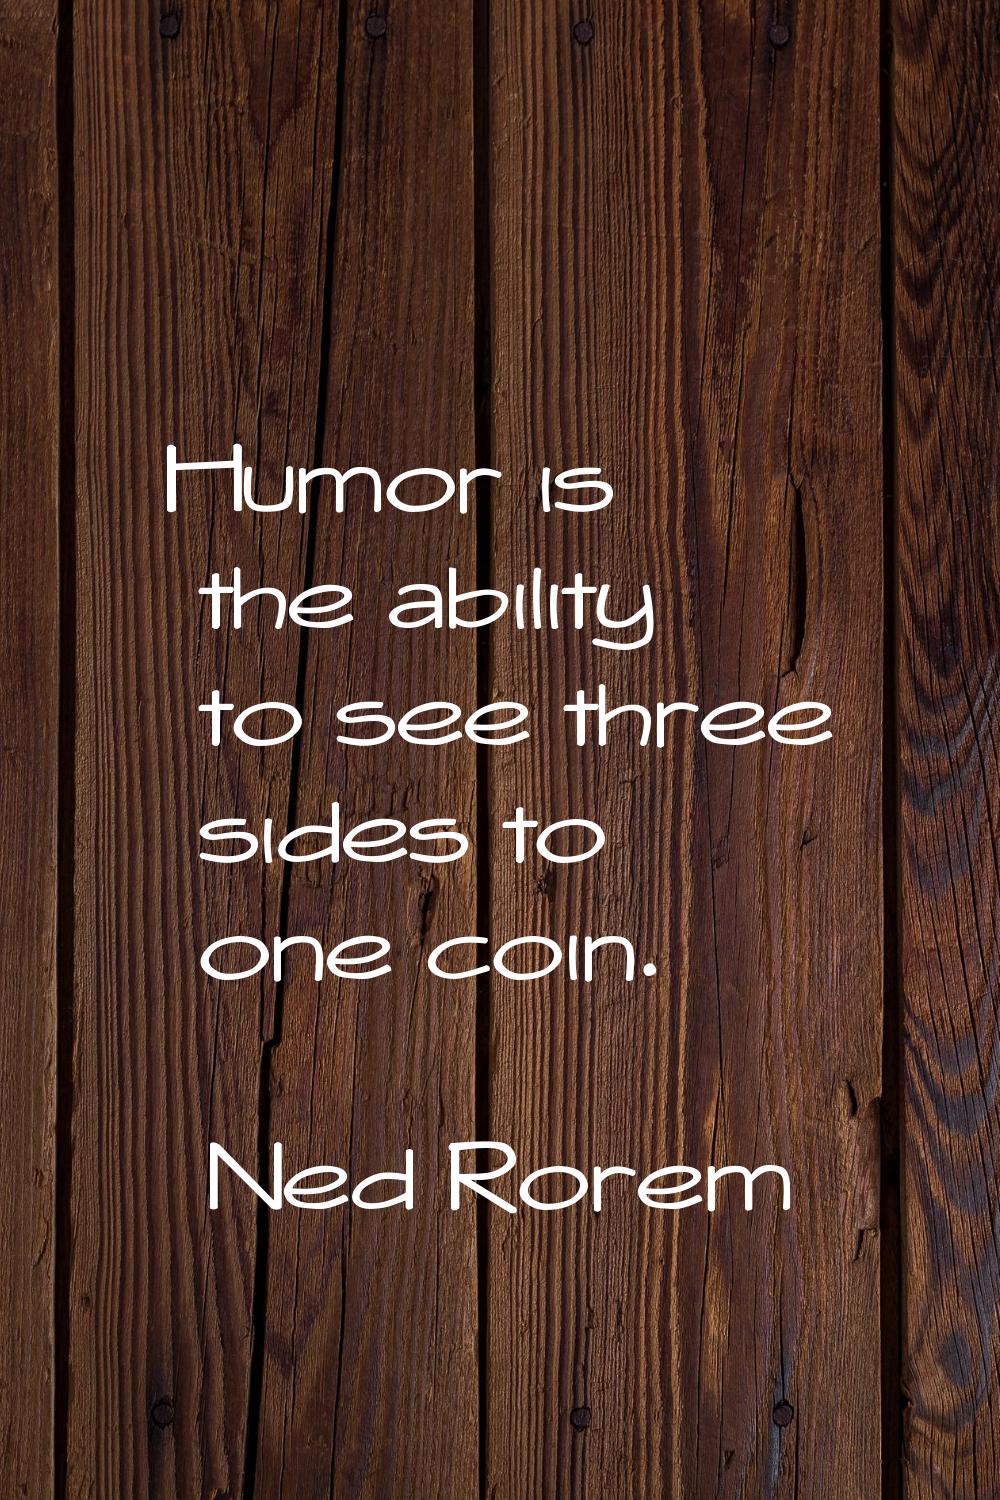 Humor is the ability to see three sides to one coin.